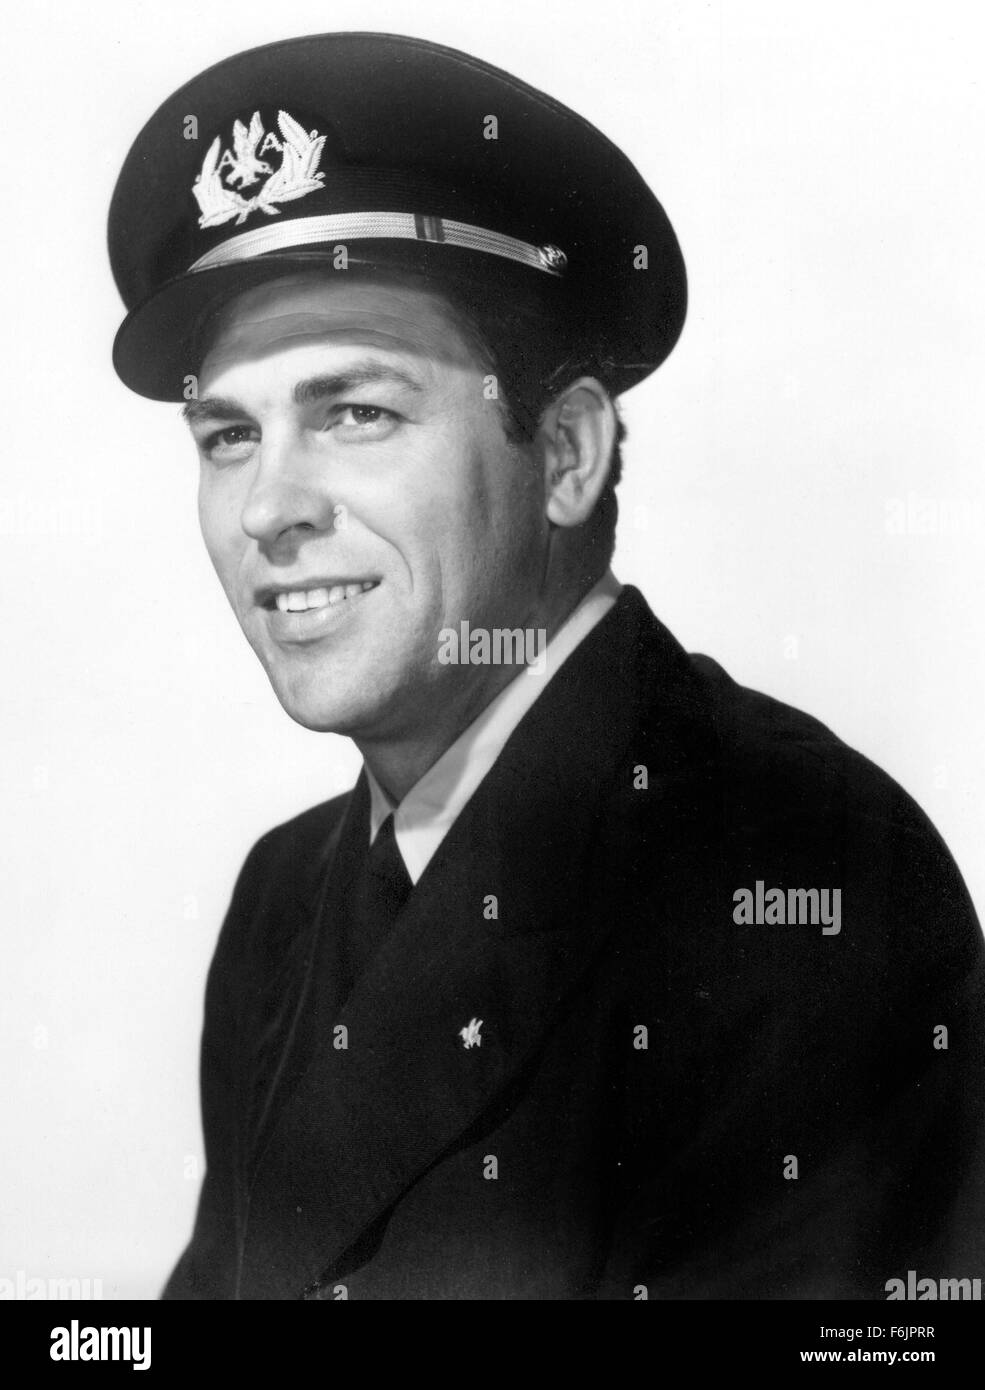 Nov 07, 2004; Los Angeles, CA, USA; File Photo: 1950's Location Unknown MGM Movie Still. Singer HOWARD KEEL, the baritone who romanced his way through a series of glittery MGM musicals such as 'Kiss Me Kate' and 'Annie Get Your Gun' and later revived his career with television's 'Dallas,' died Sunday of colon cancer. He was 85. Keel studie shis lines before performance. Stock Photo